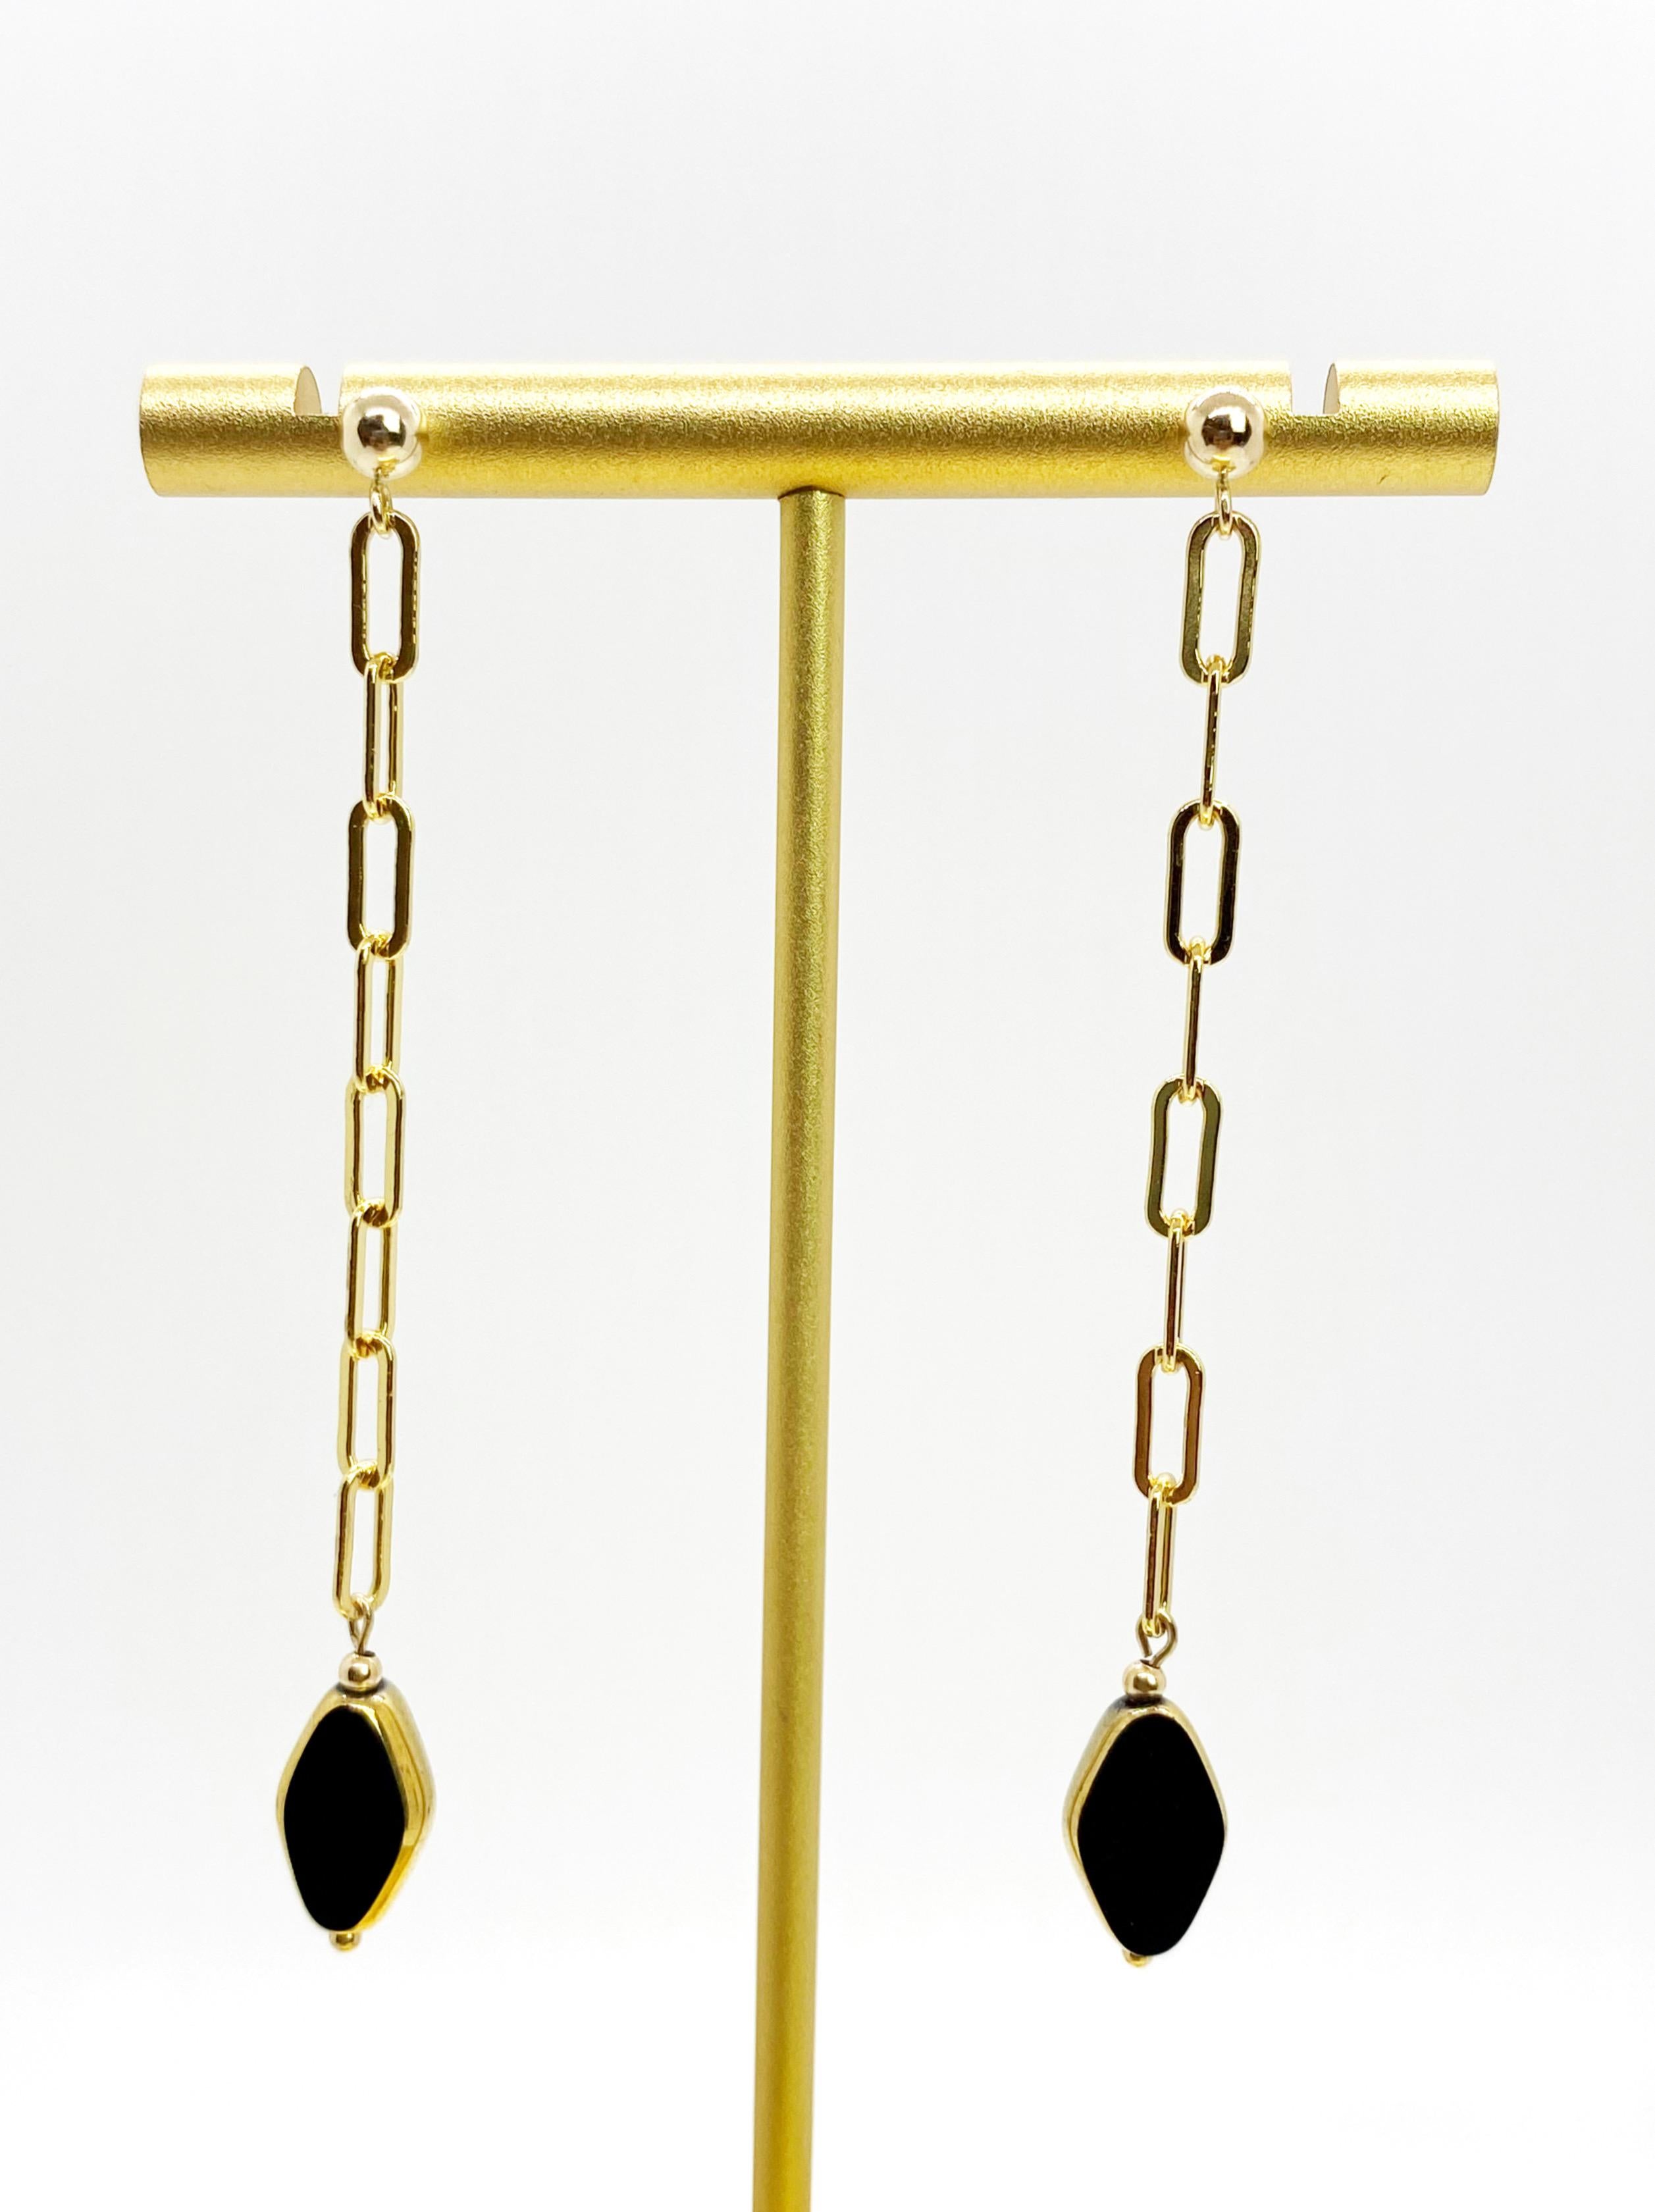 Black Diamond Shaped Vintage German Glass Bead on Gold filled Chain Earrings In New Condition For Sale In Monrovia, CA